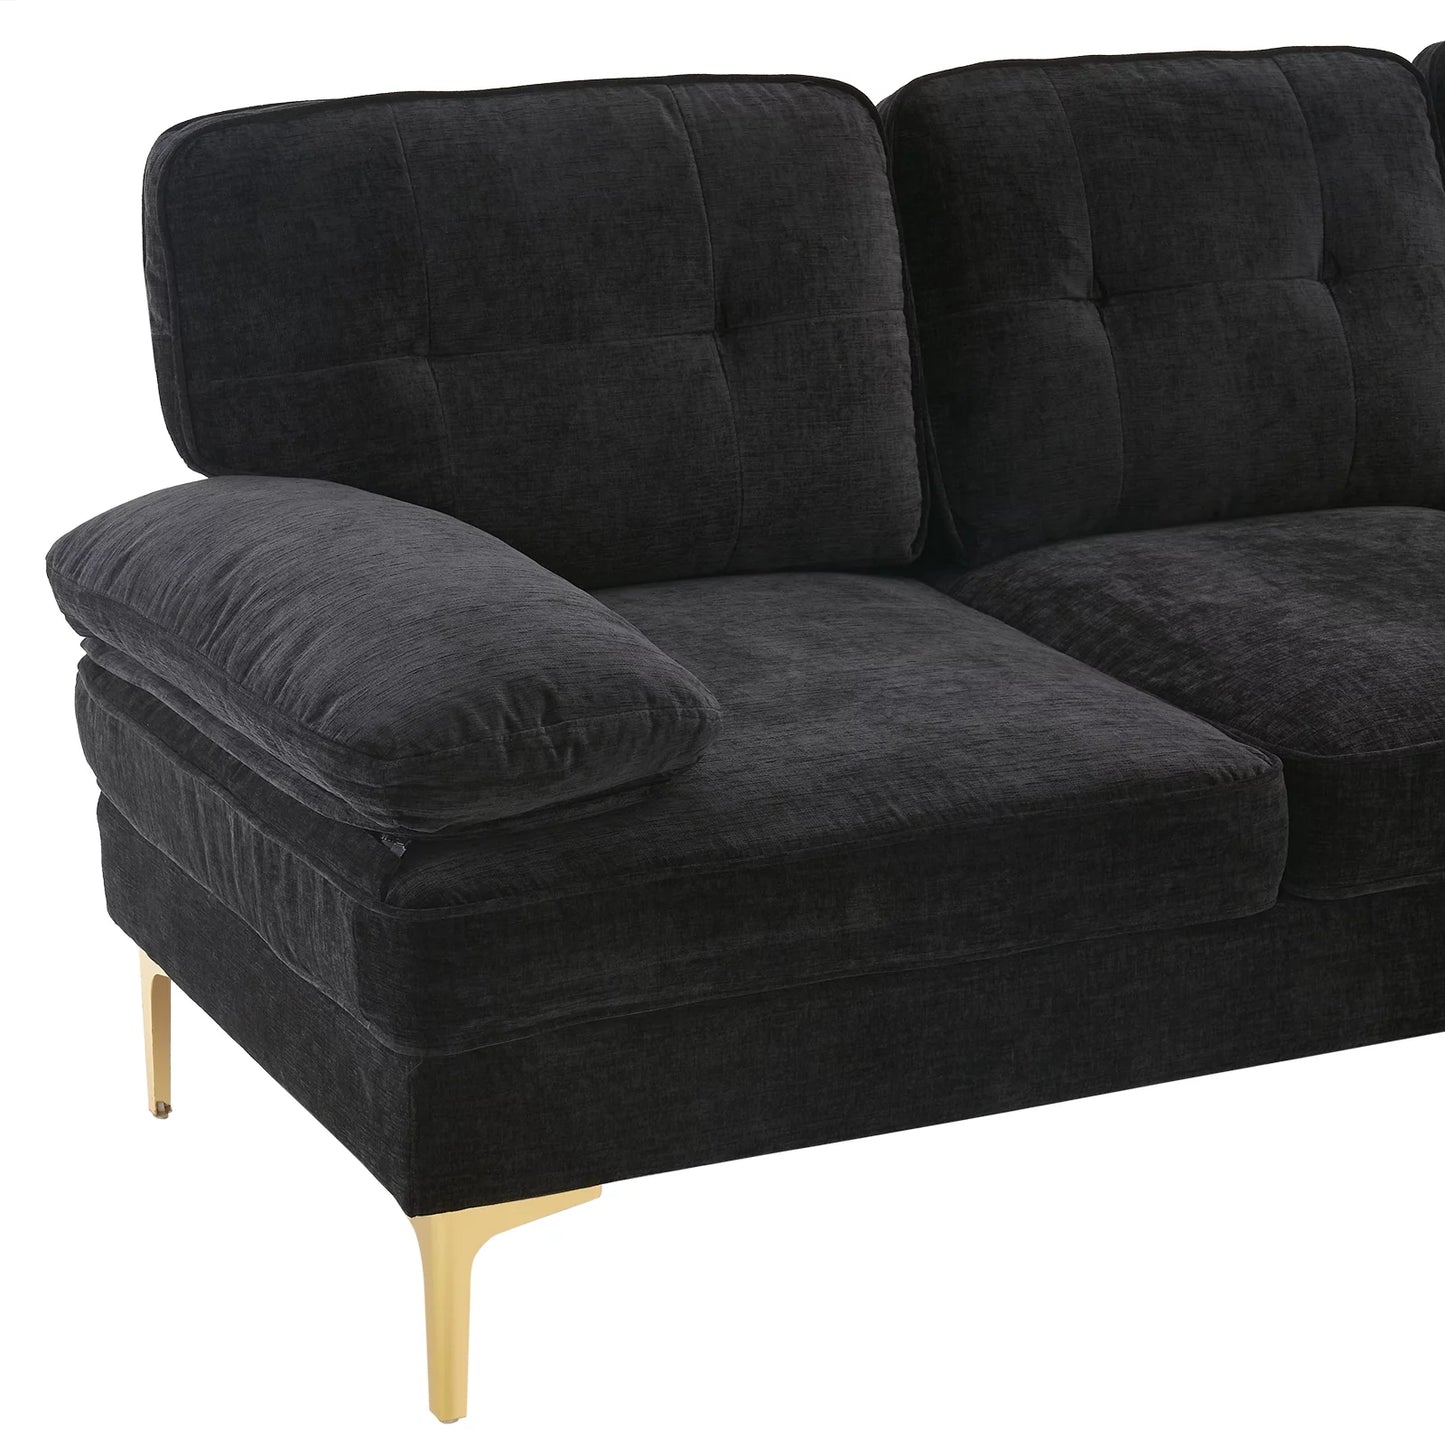 L Shaped Sectional Sofa, 83" Chenille Fabric Upholstered Tufted Couch, 3 Seats Wide Chaise Lounge for Living Room Black - Design By Technique